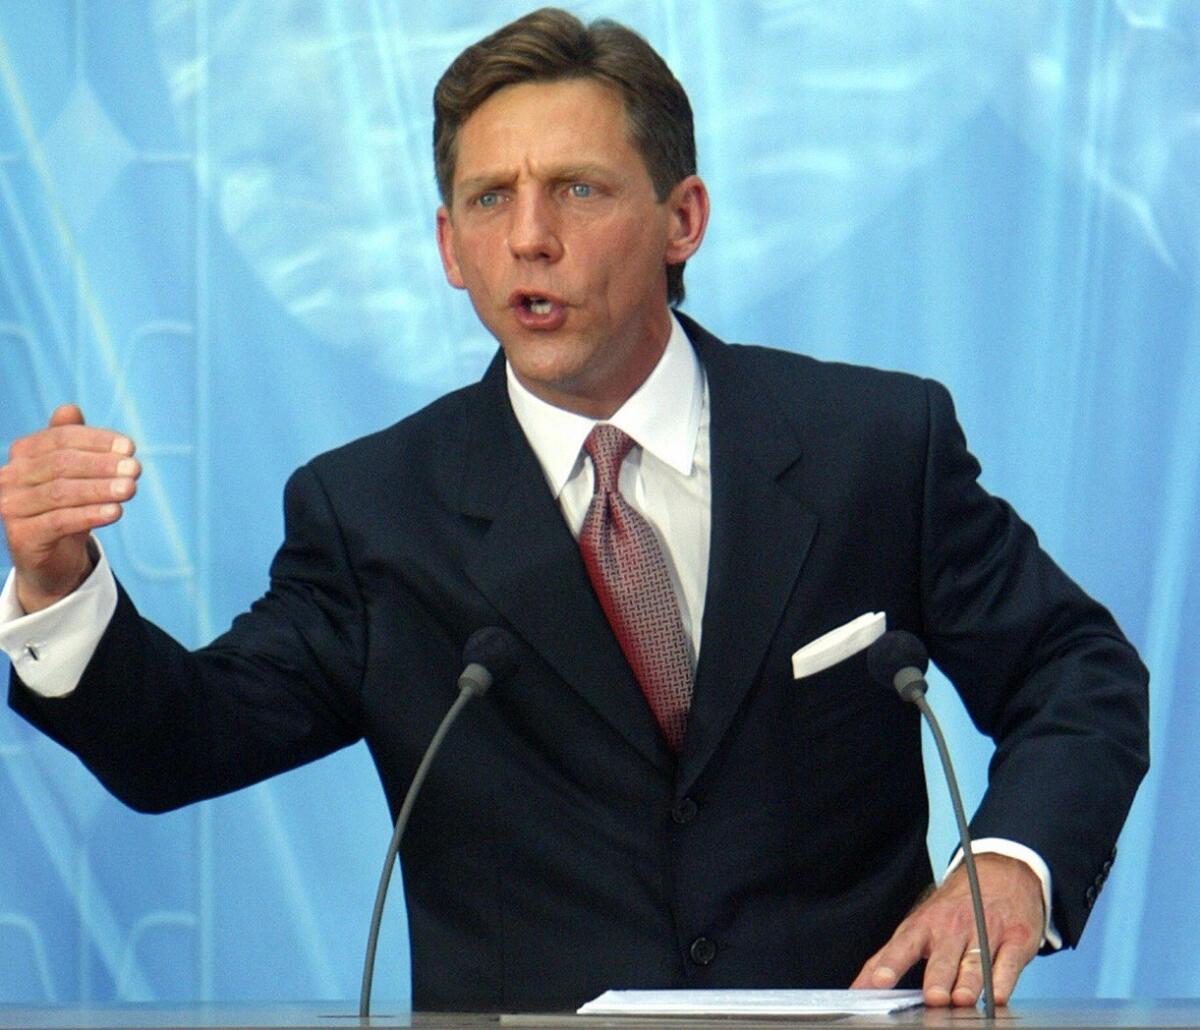 David Miscavige became head of the Church of Scientology in 1986.